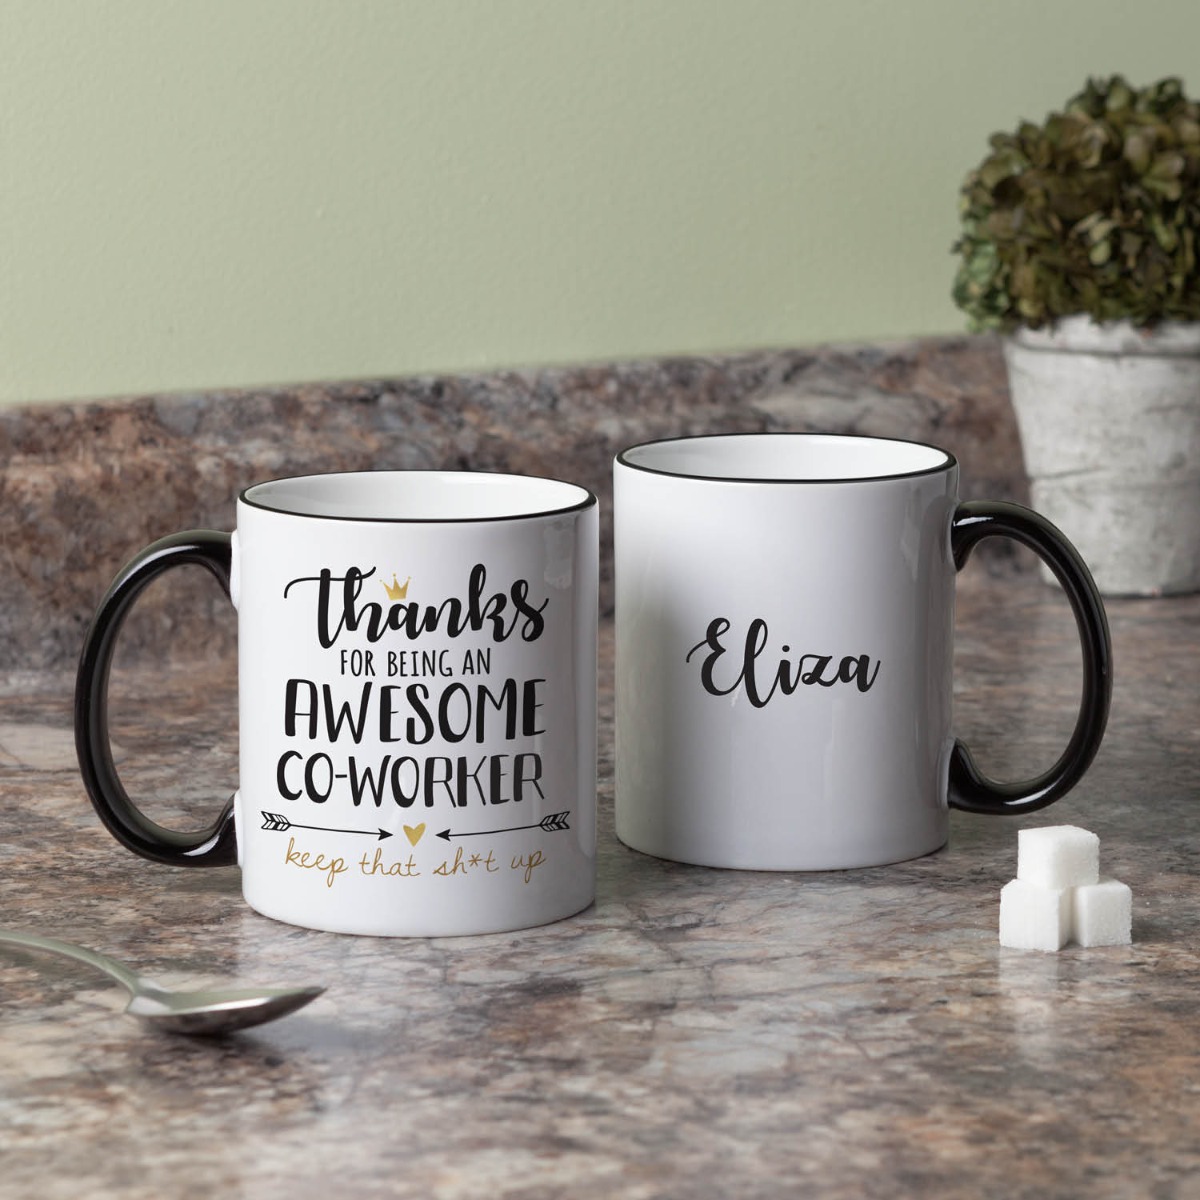 Thanks for Being An Awesome Co-Worker Black Handle Coffee Mug - 11 oz.